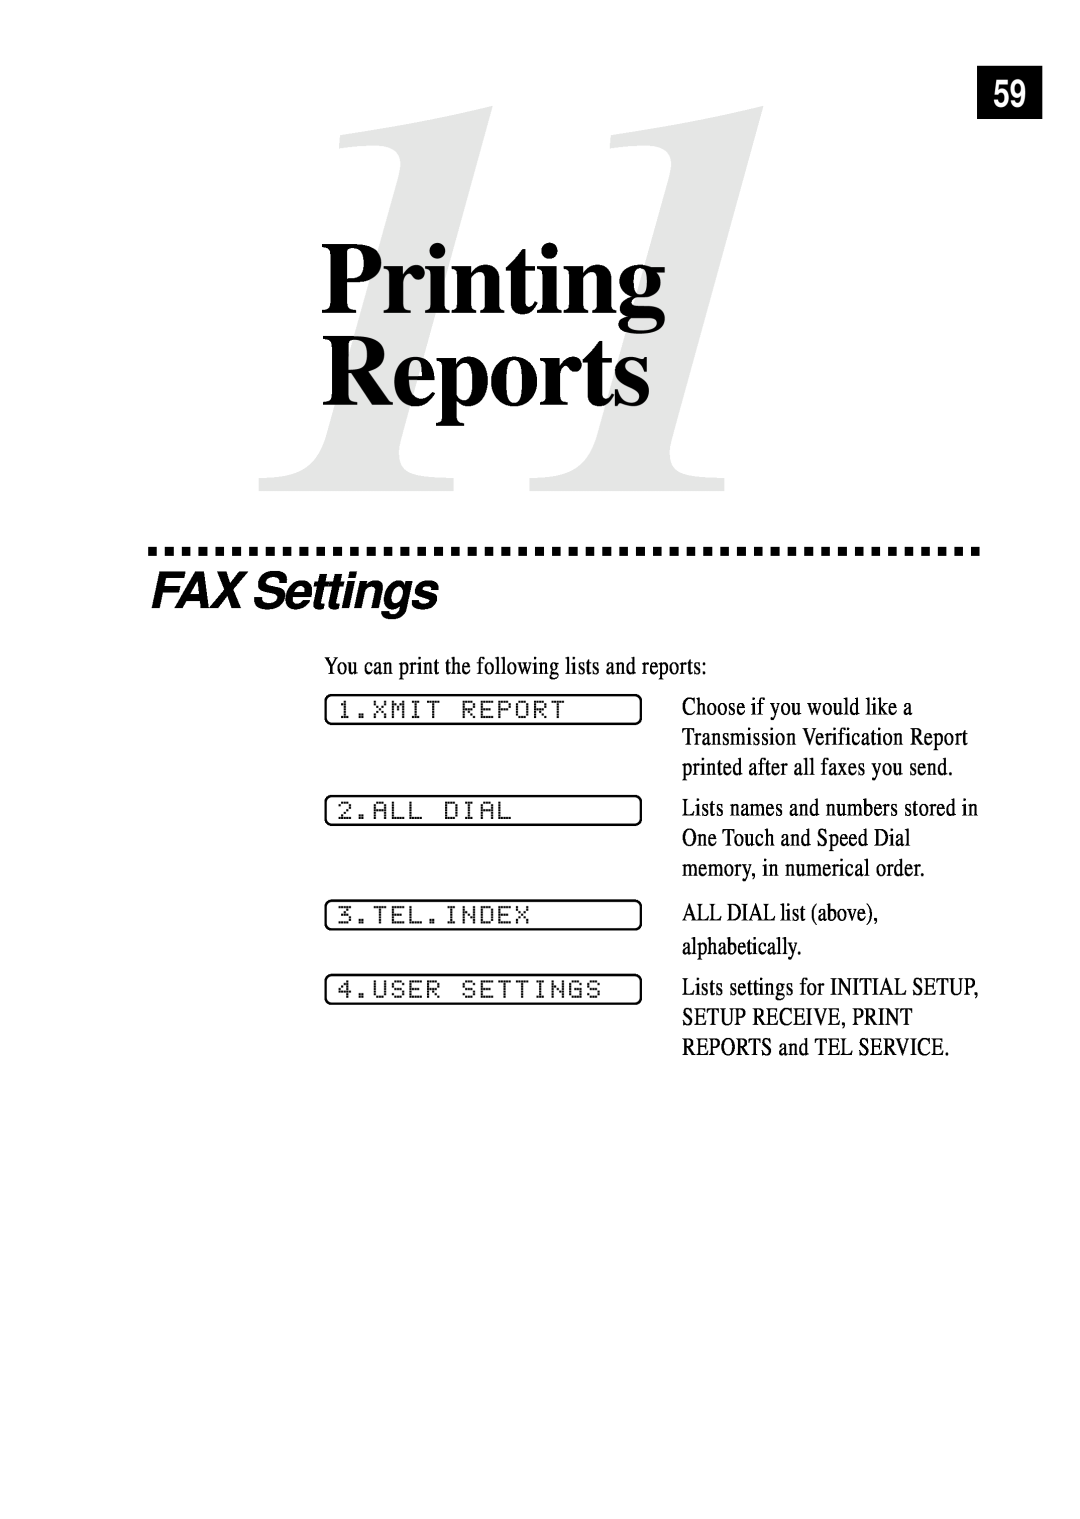 Brother FAX 255 owner manual FAX Settings, Xmit, Dial, Tel.Index, User, 11Printing Reports 